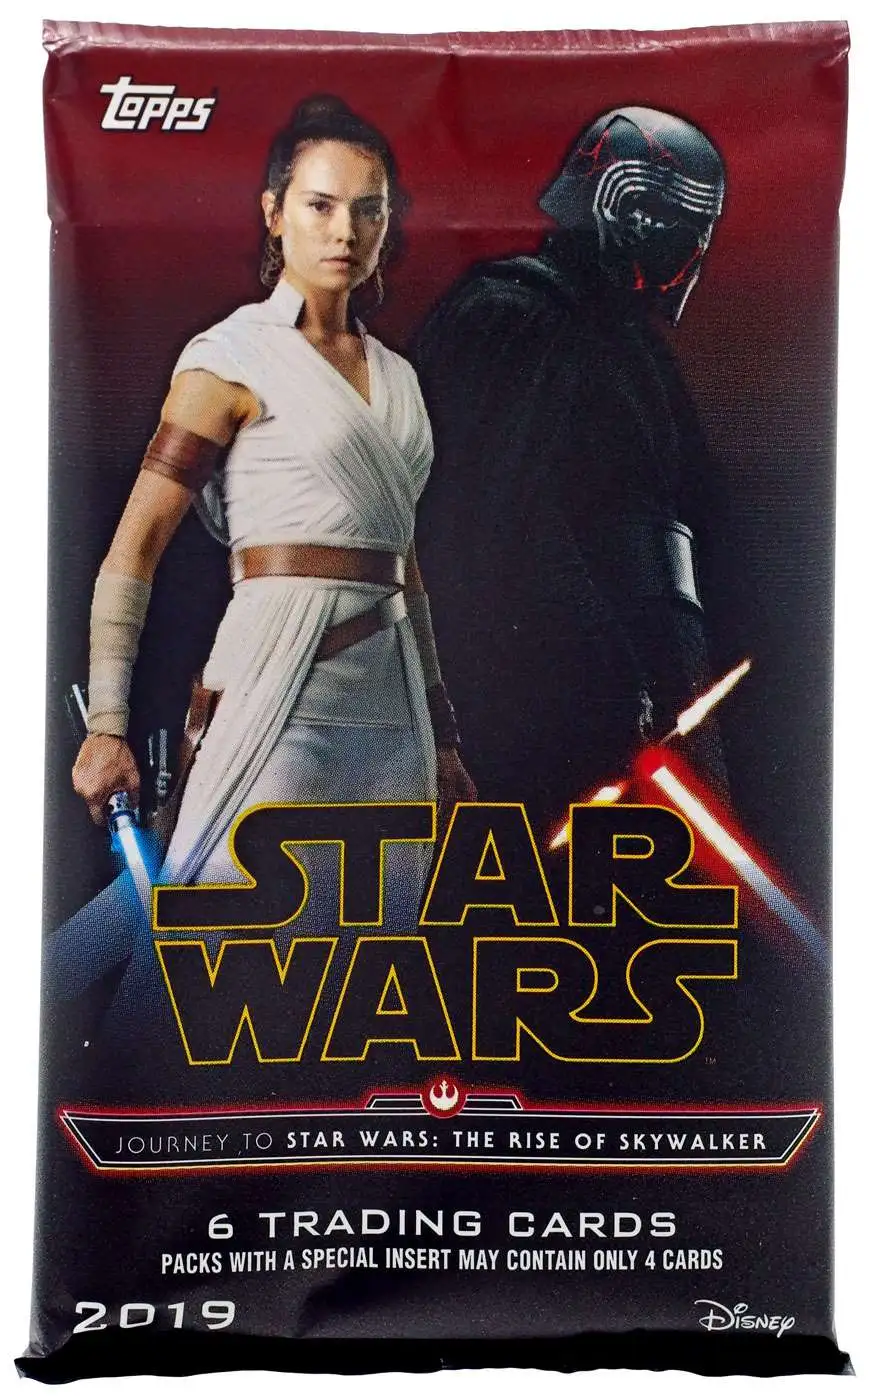 The Rise of Skywalker Trailer Poster Card 2 topps card Star Wars 